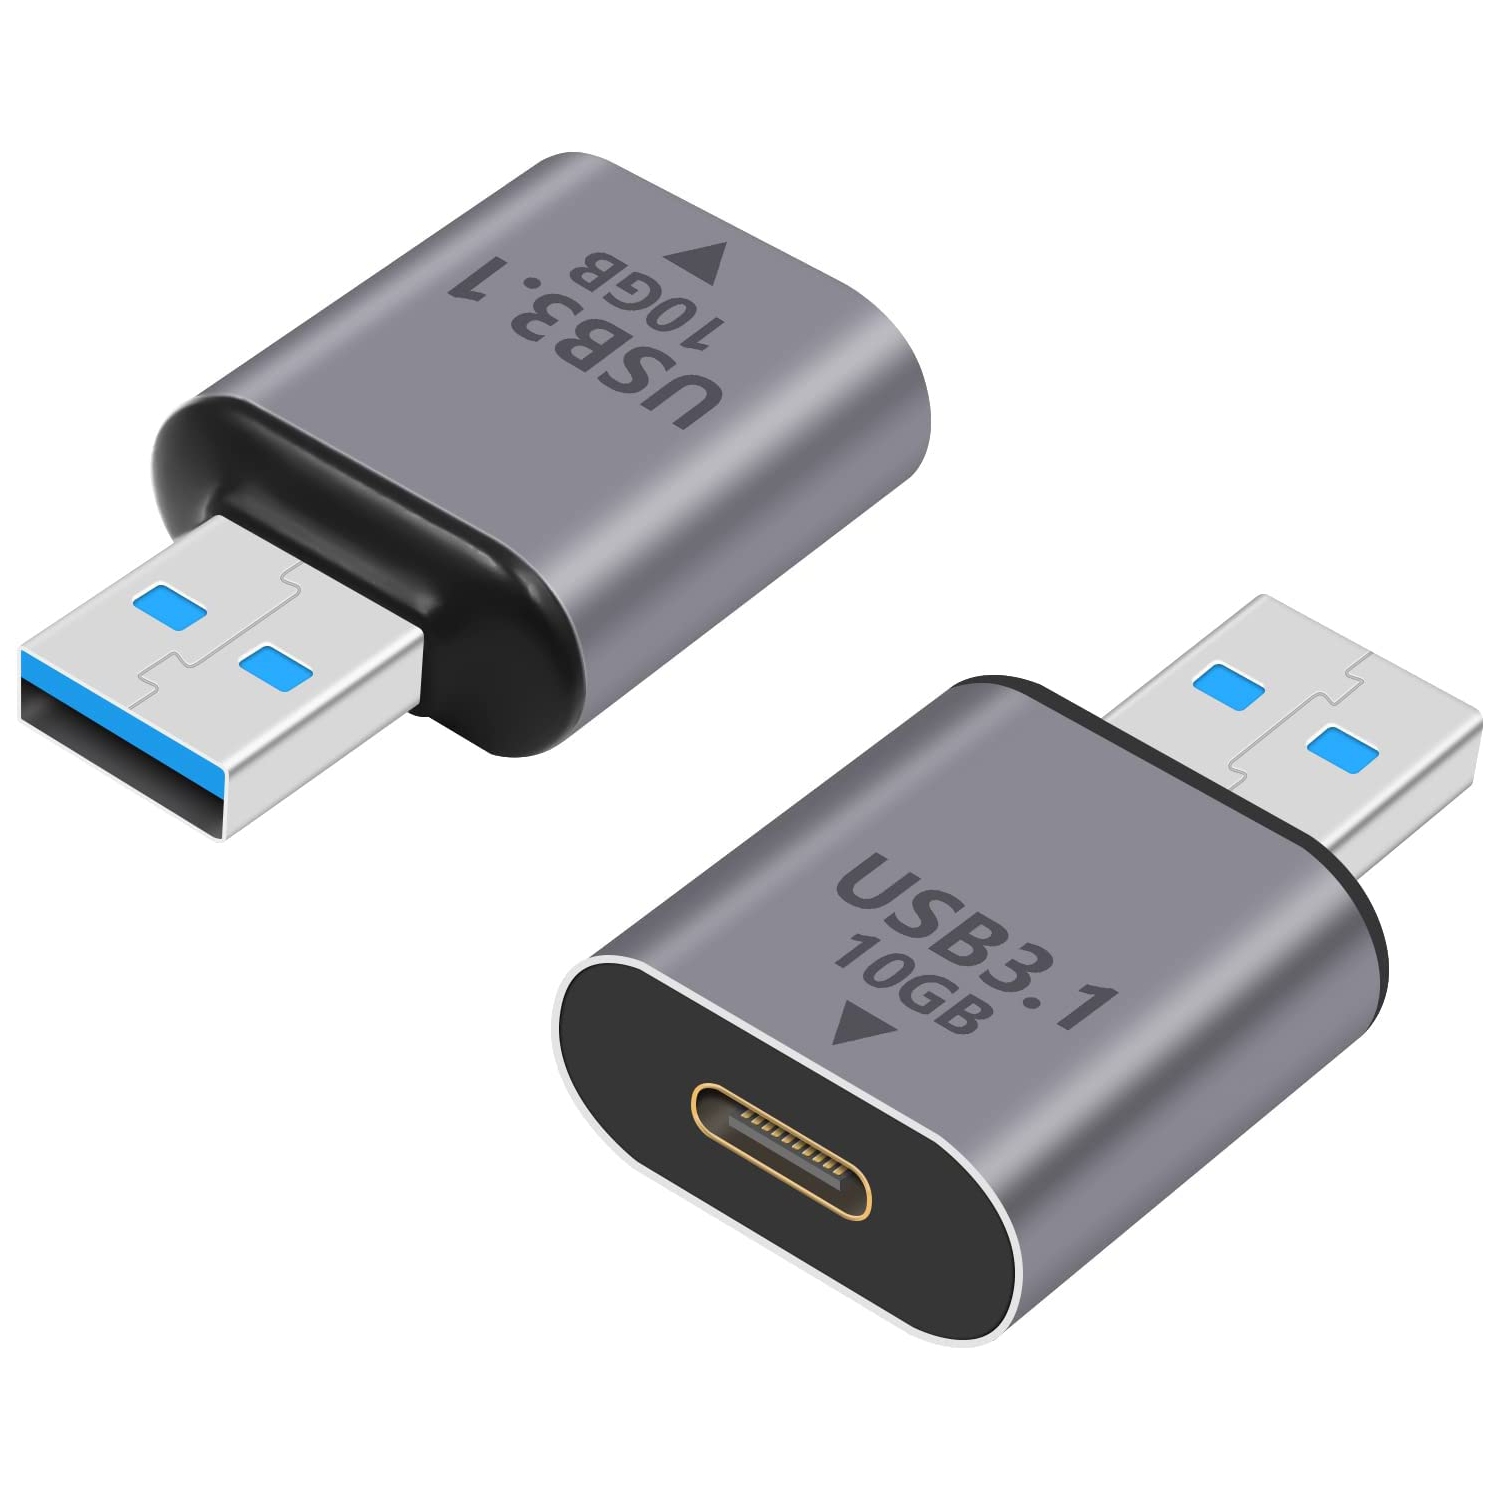 P USB C Female to USB Male Adapter, 3.1 Gen2 USB to USB C Adapter, 10Gbps USB 3.1 Type C to Type A Charger Converter OTG Fast Charging Compatible with iPhone, MacBook, Samsung Gala